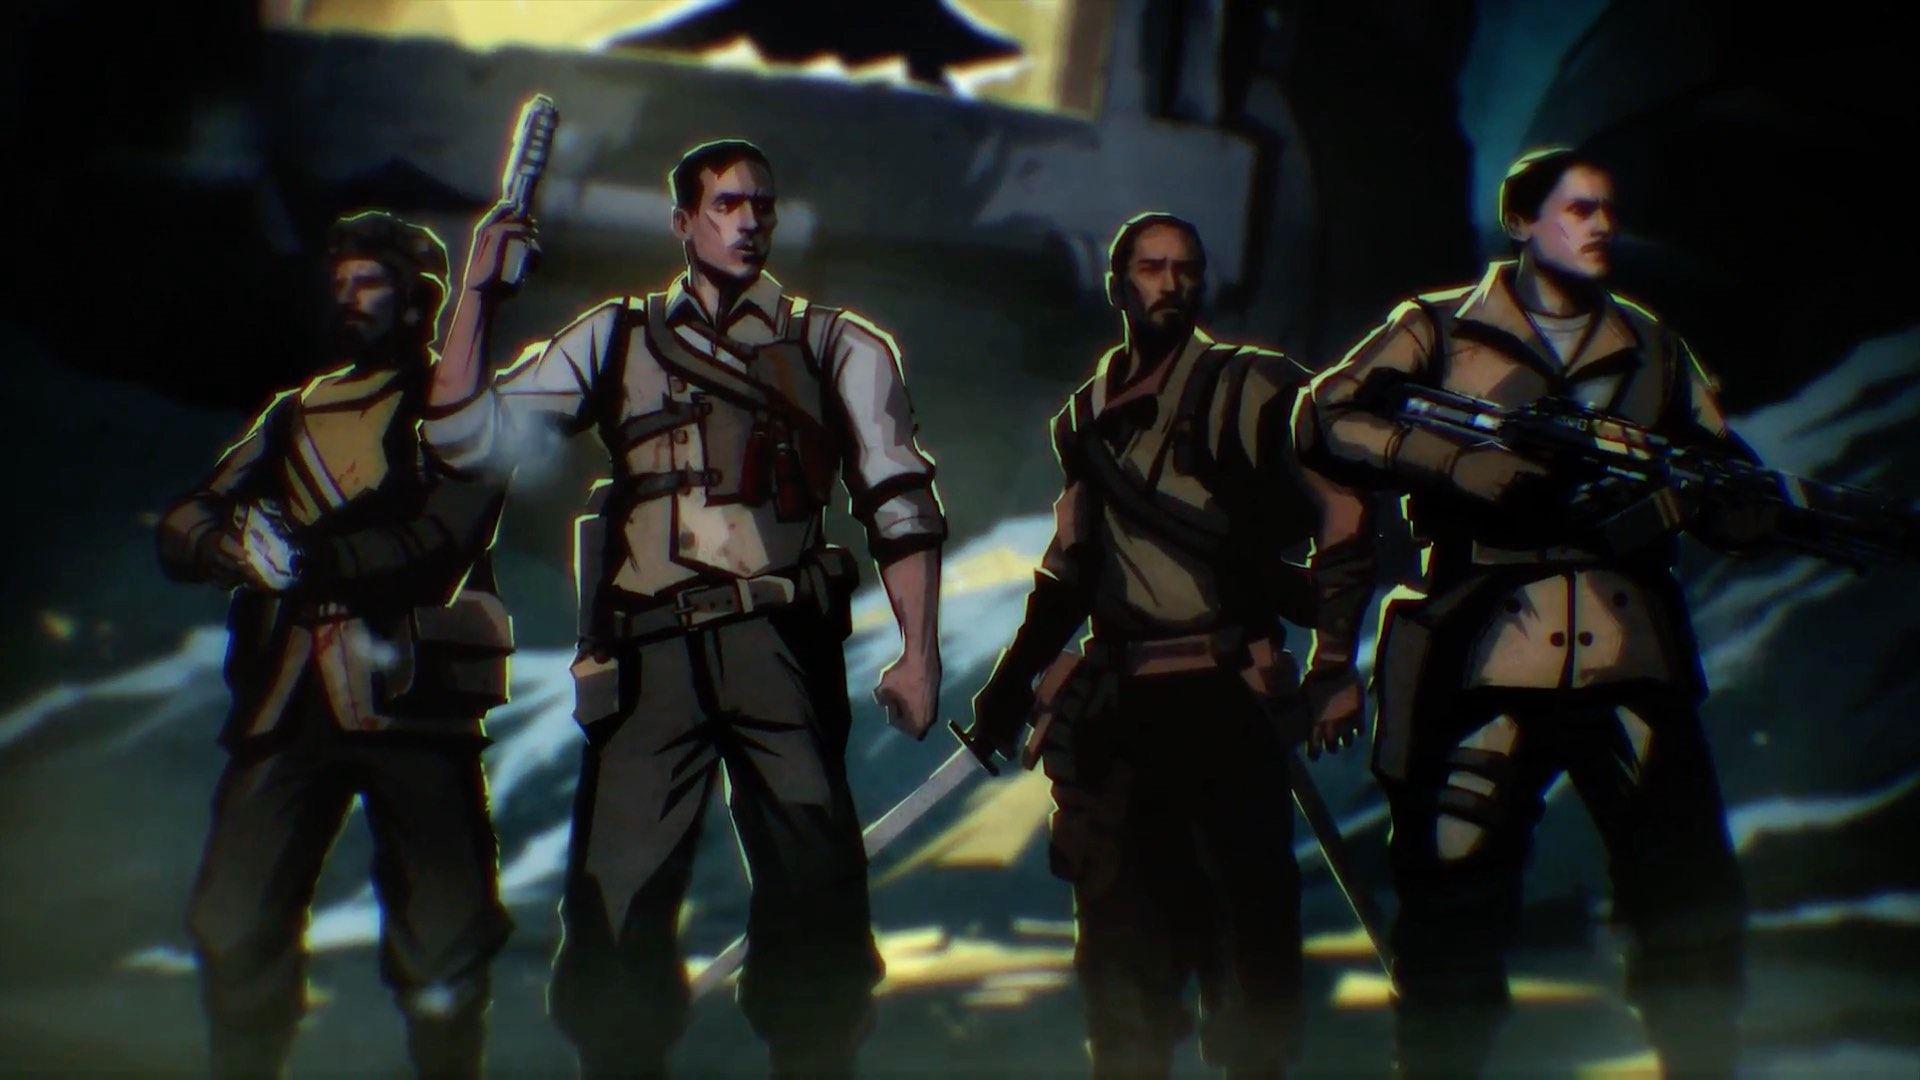 Black Ops III Der Eisendrache Zombies Intro Channels The Iron